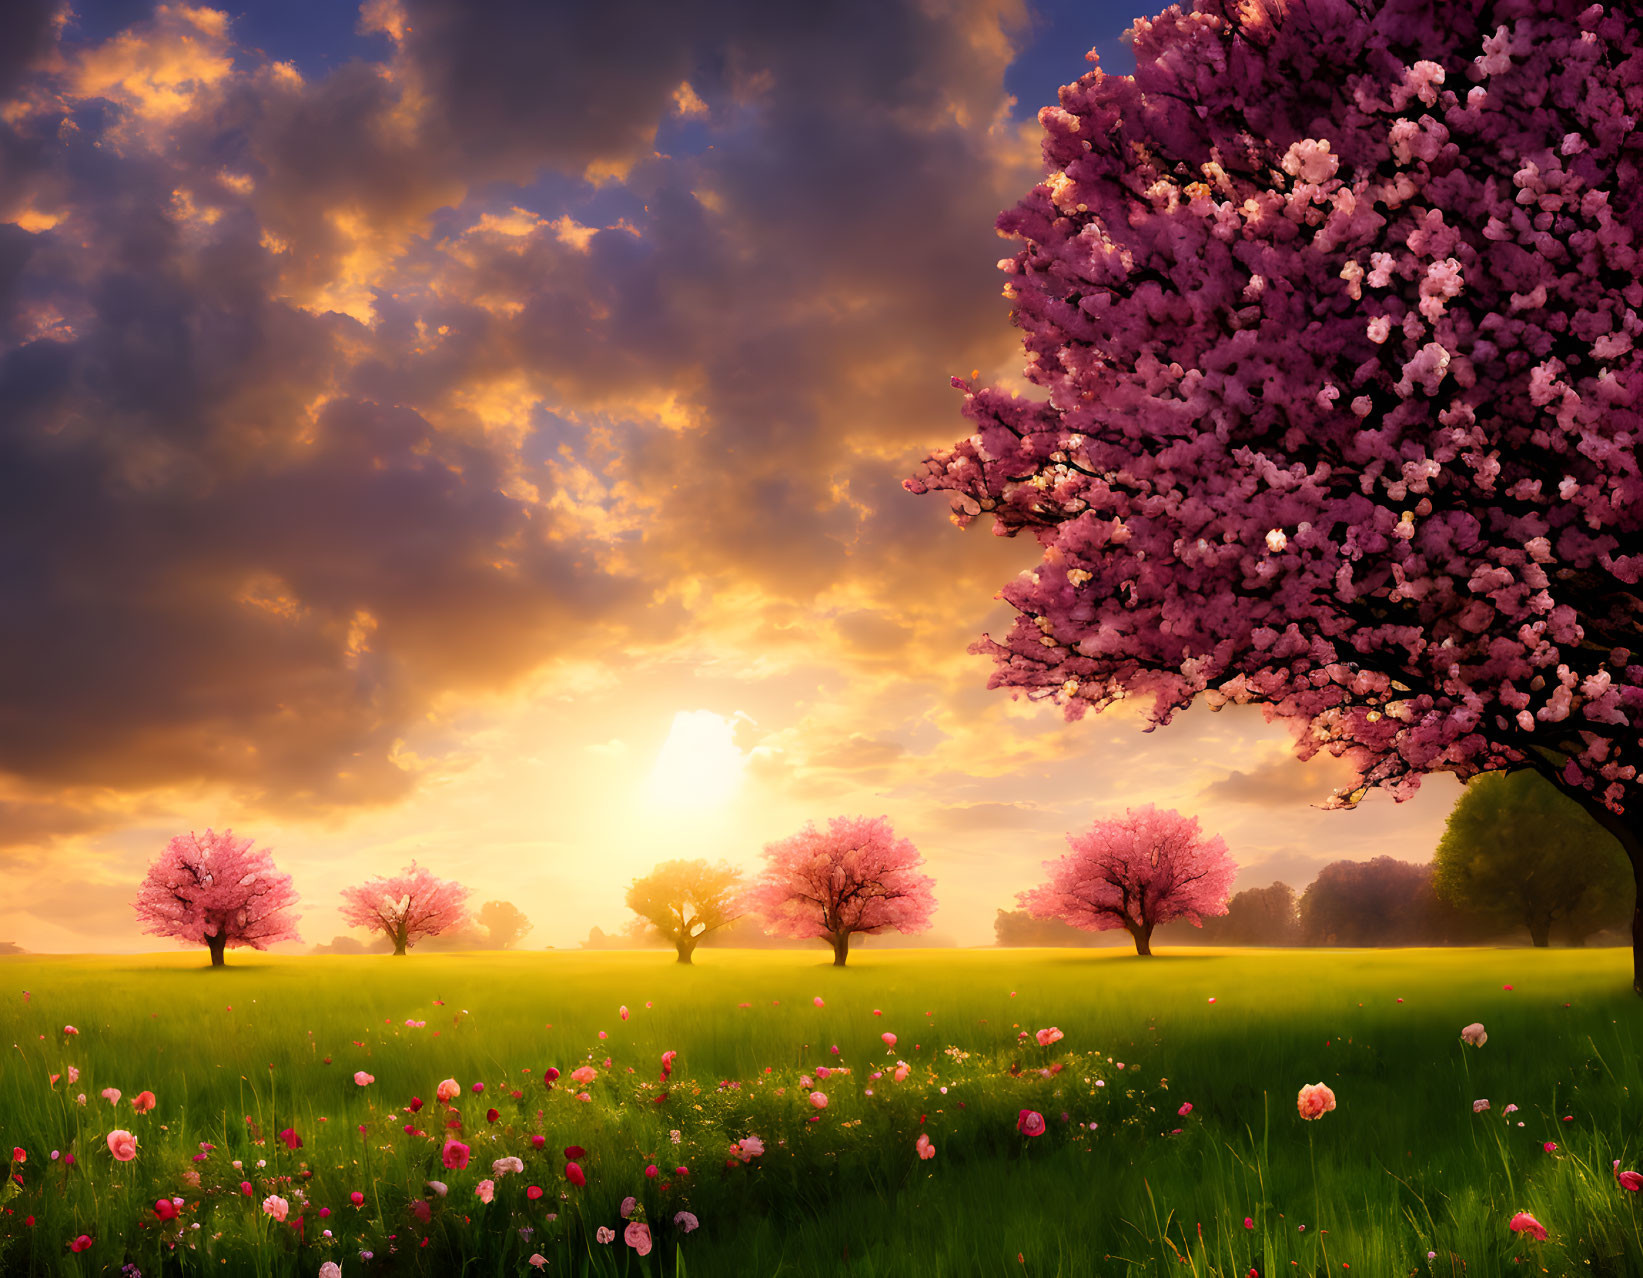 Tranquil Sunset Landscape with Cherry Blossoms and Wildflowers